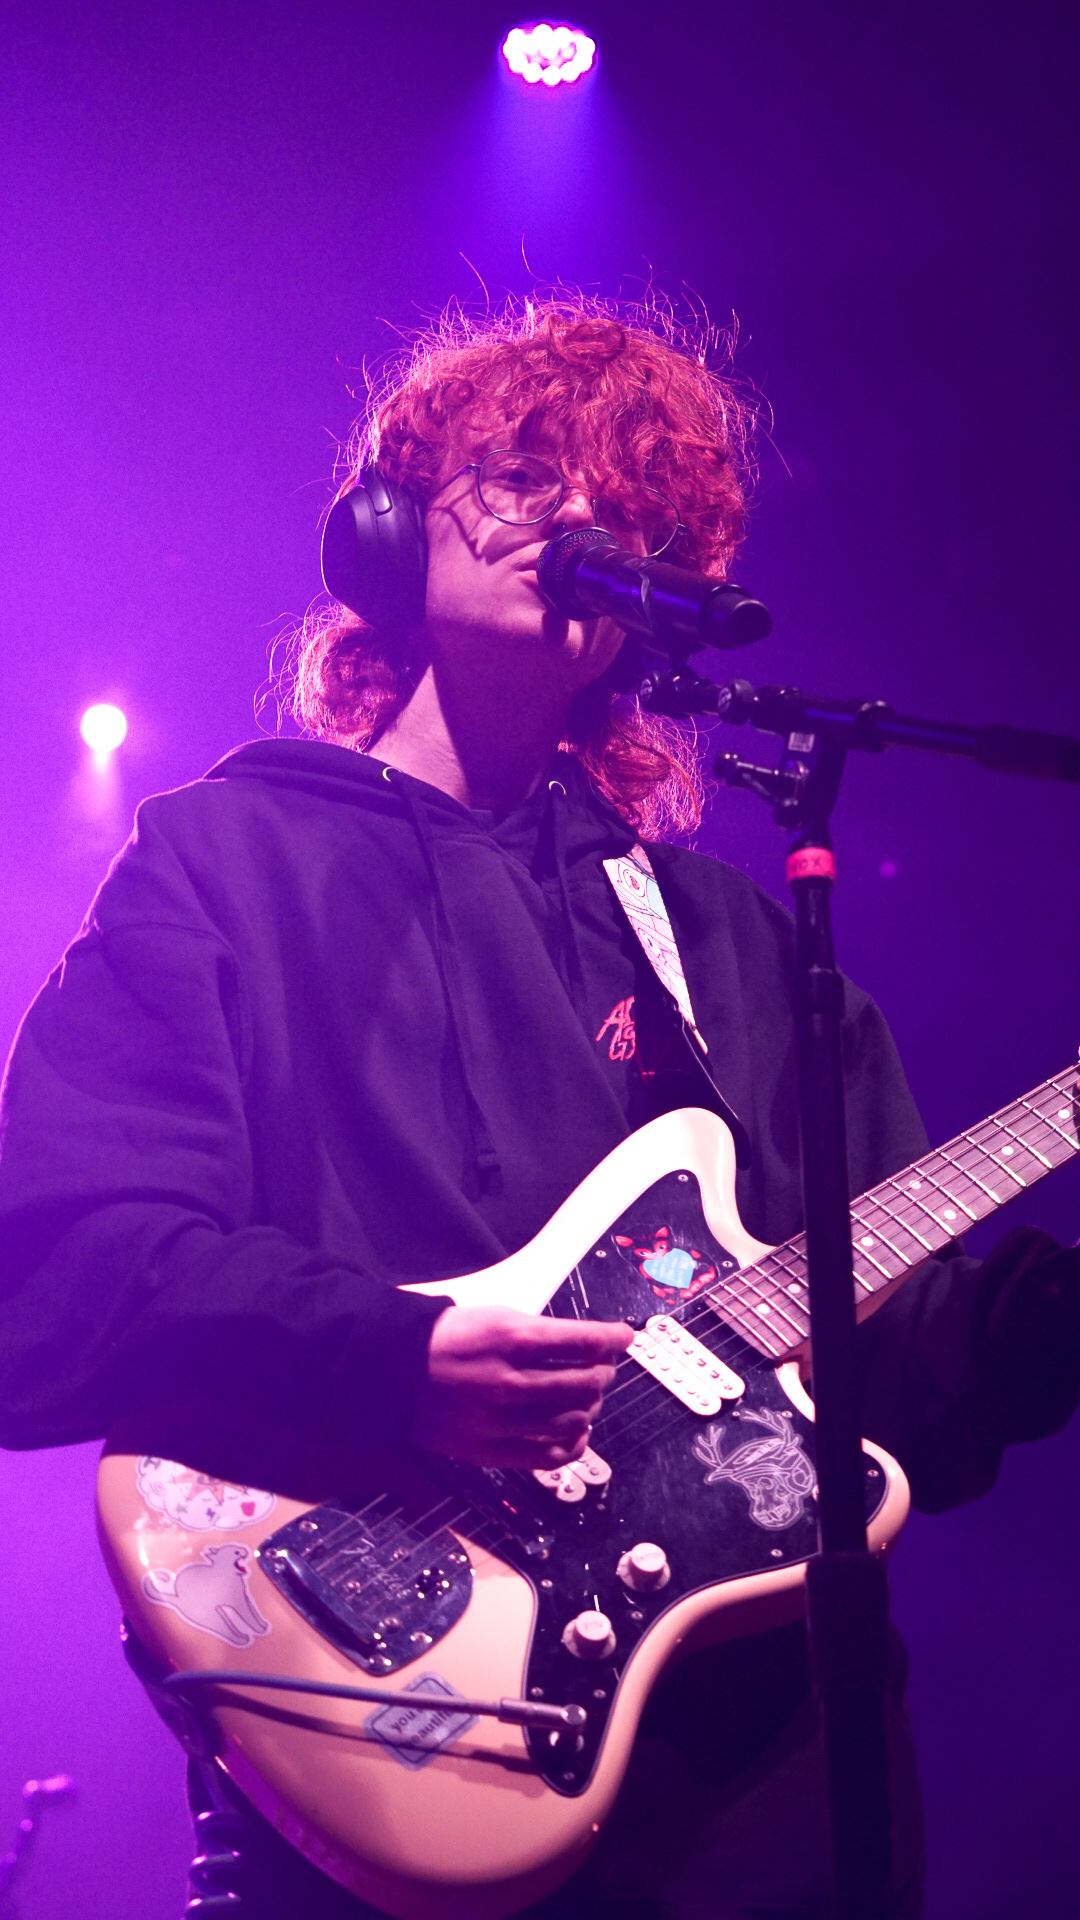 Cavetown and Tessa Violet playing at The Mission Ballroom (Photos: Christina Lane, Oliver Thieme)